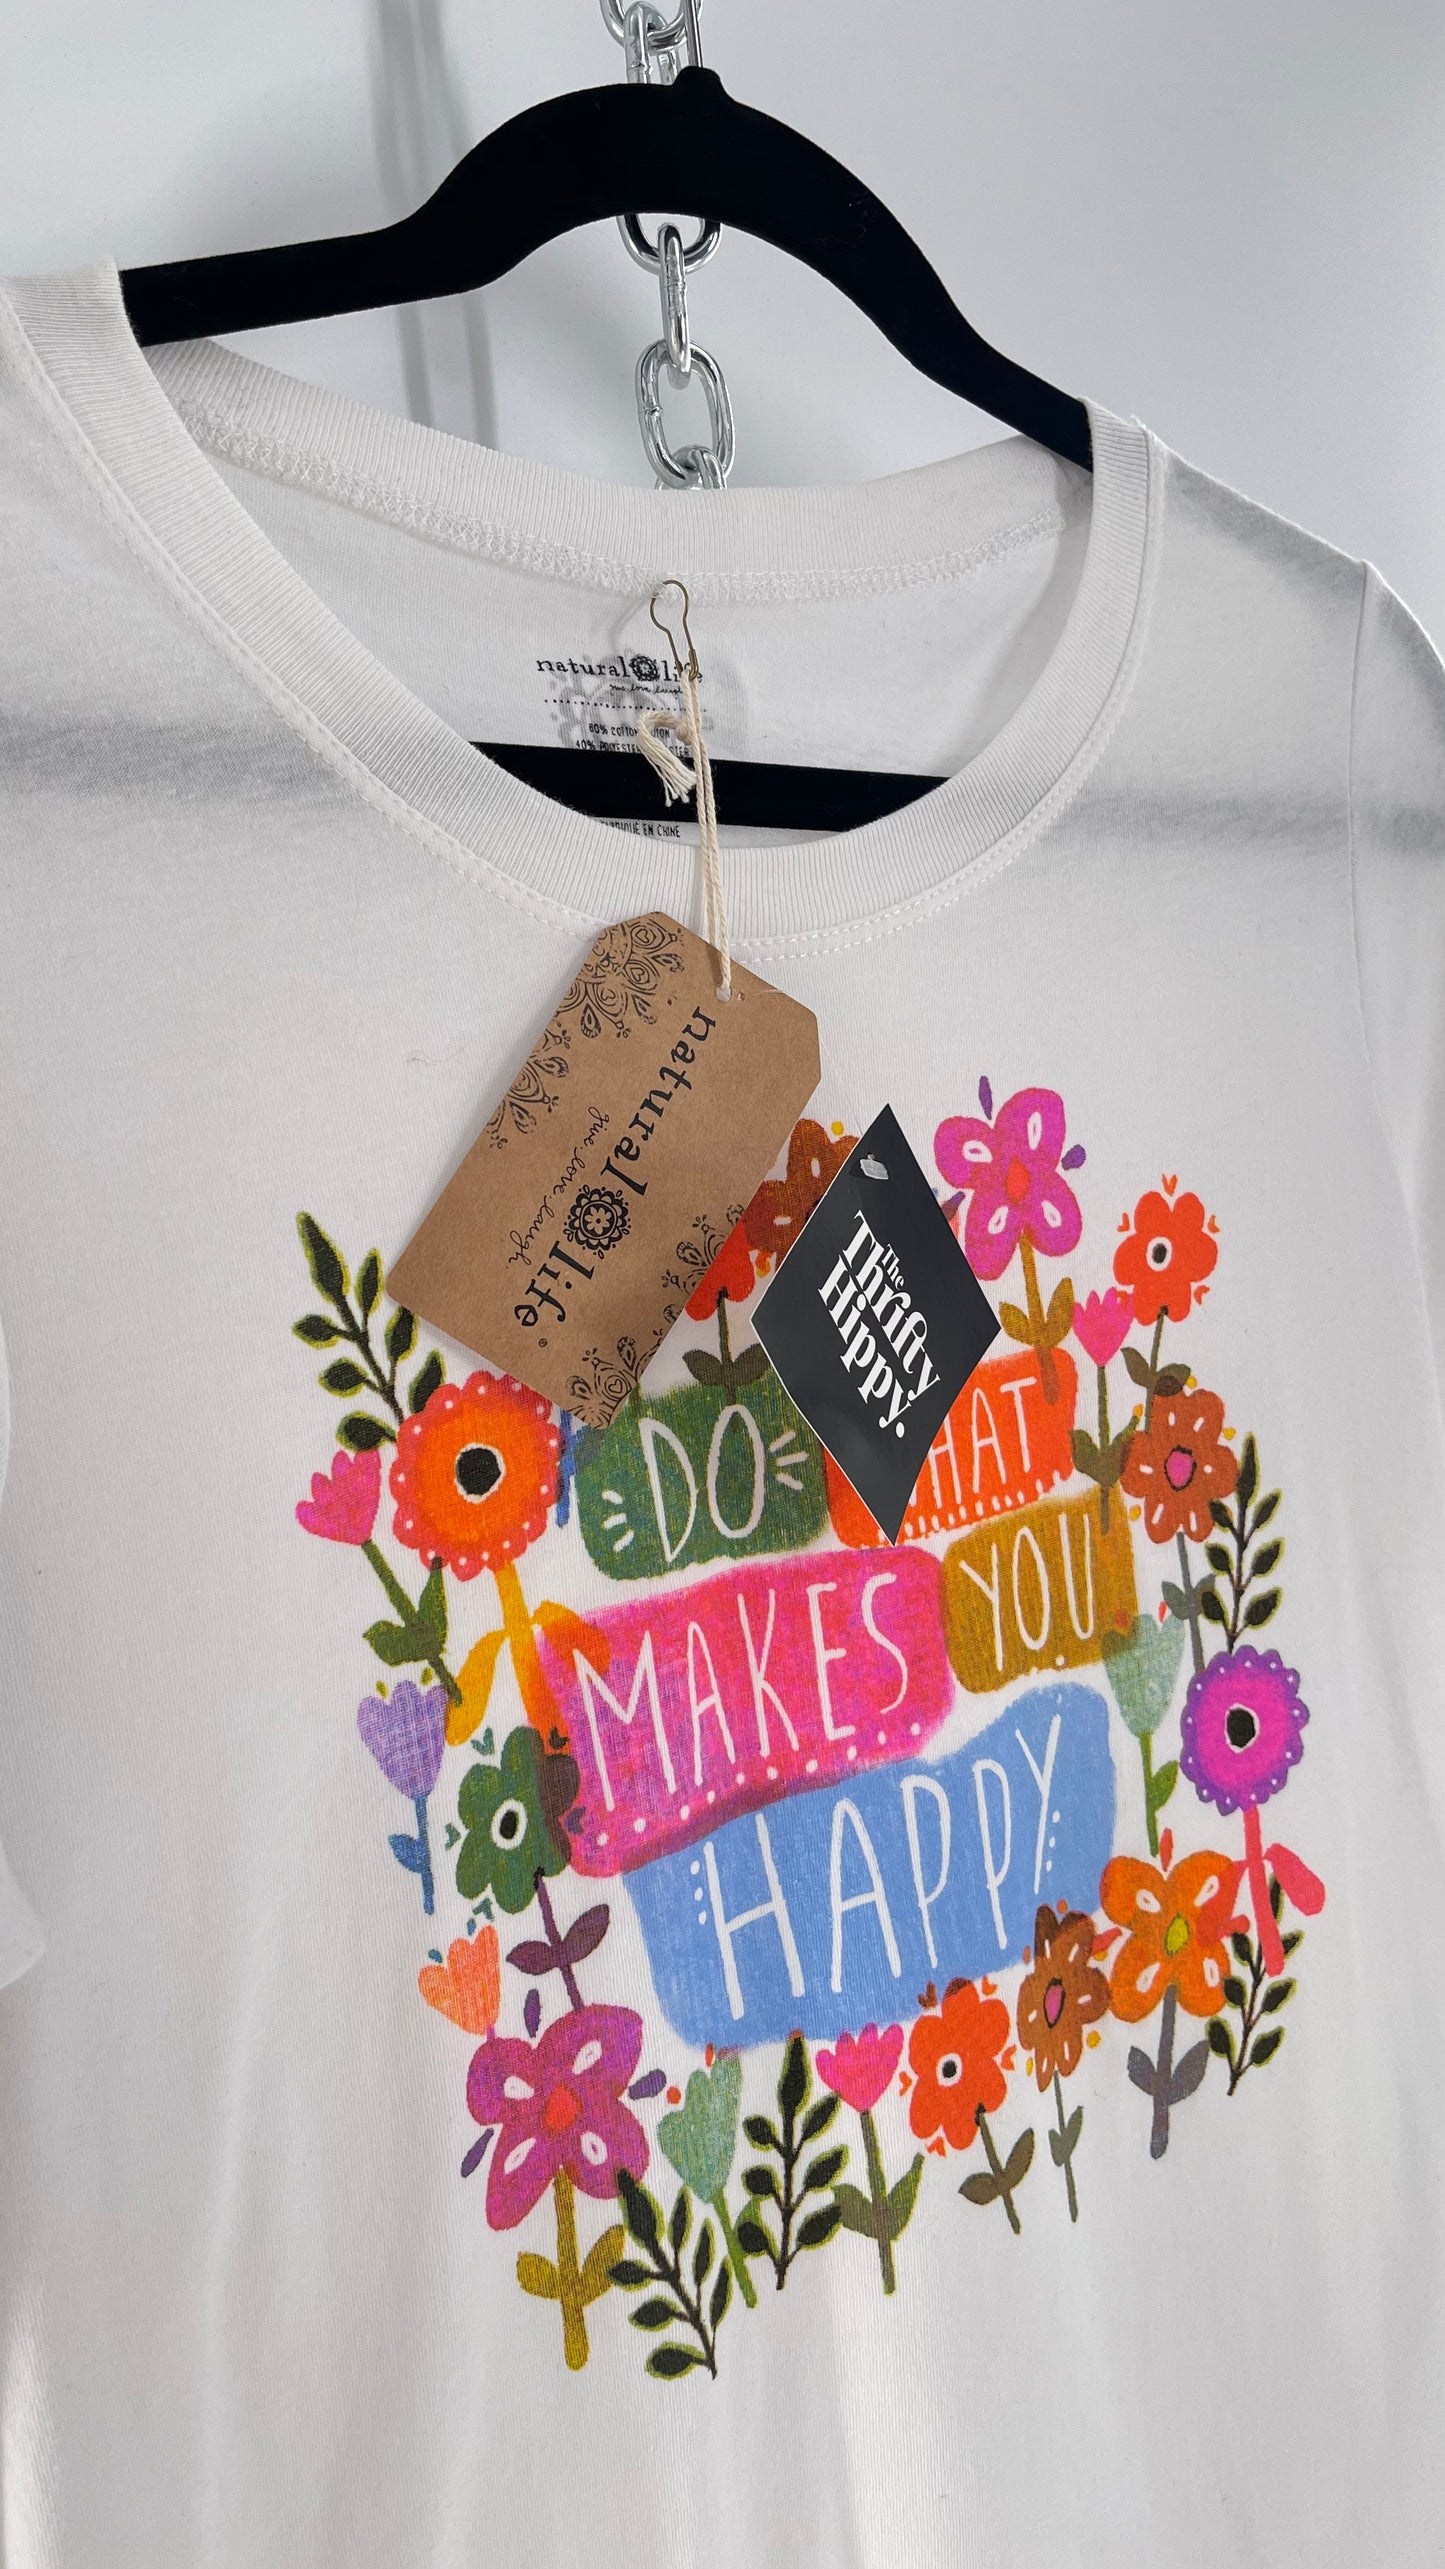 Natural Life Blooming Beauty T Shirt with Tags Attached (Large)